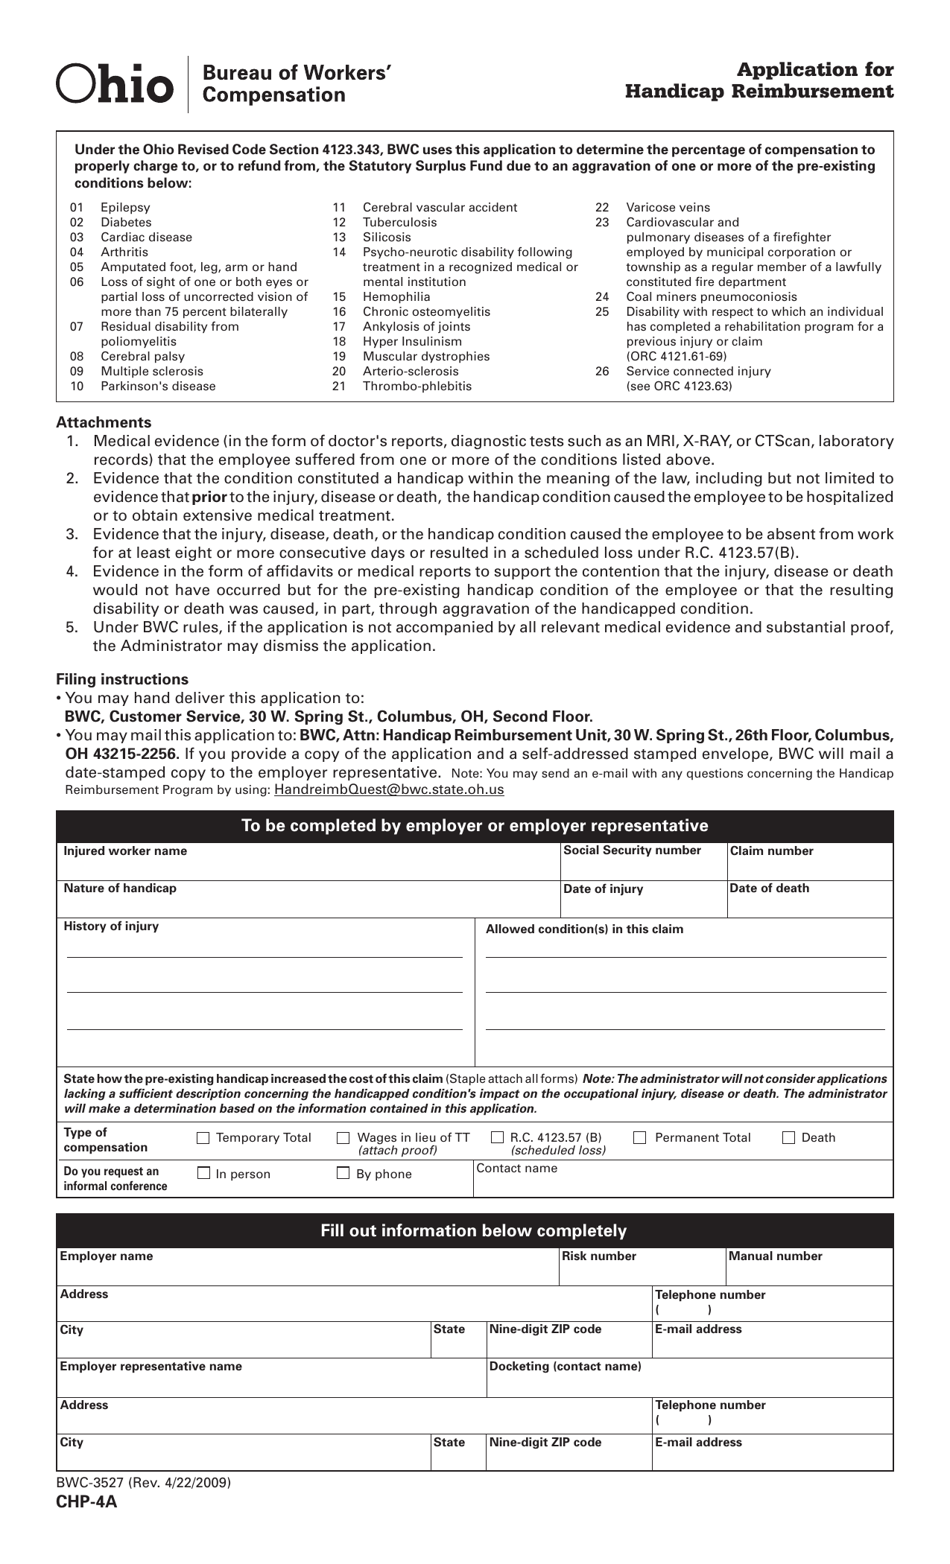 form-chp-4a-bwc-3527-download-printable-pdf-or-fill-online